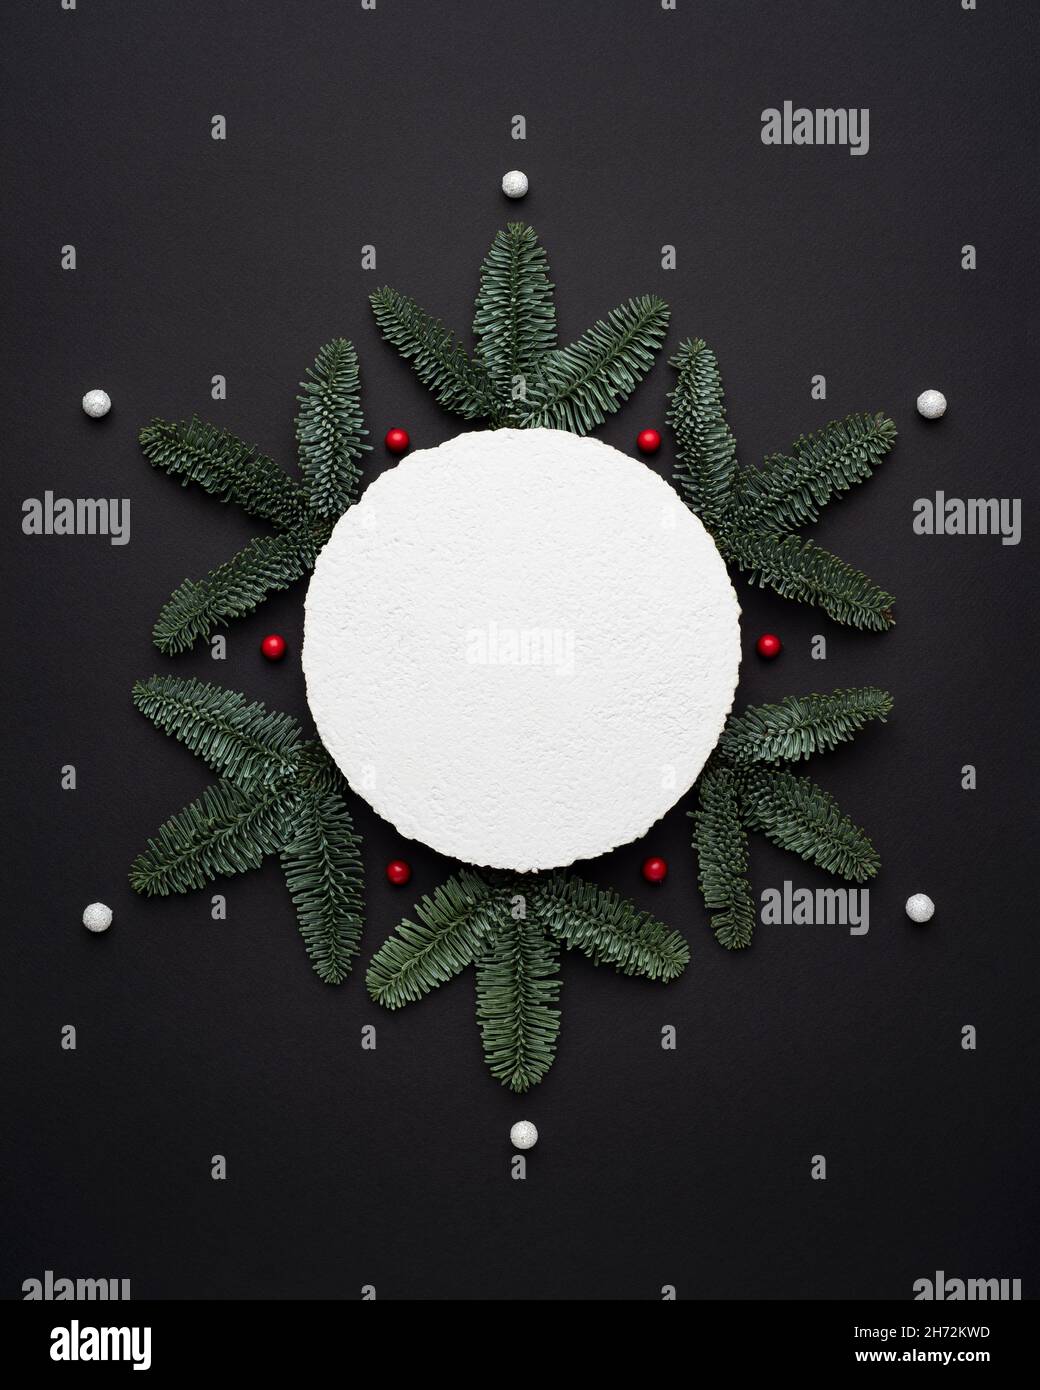 Christmas card with snowflake design and note for message on black background Stock Photo